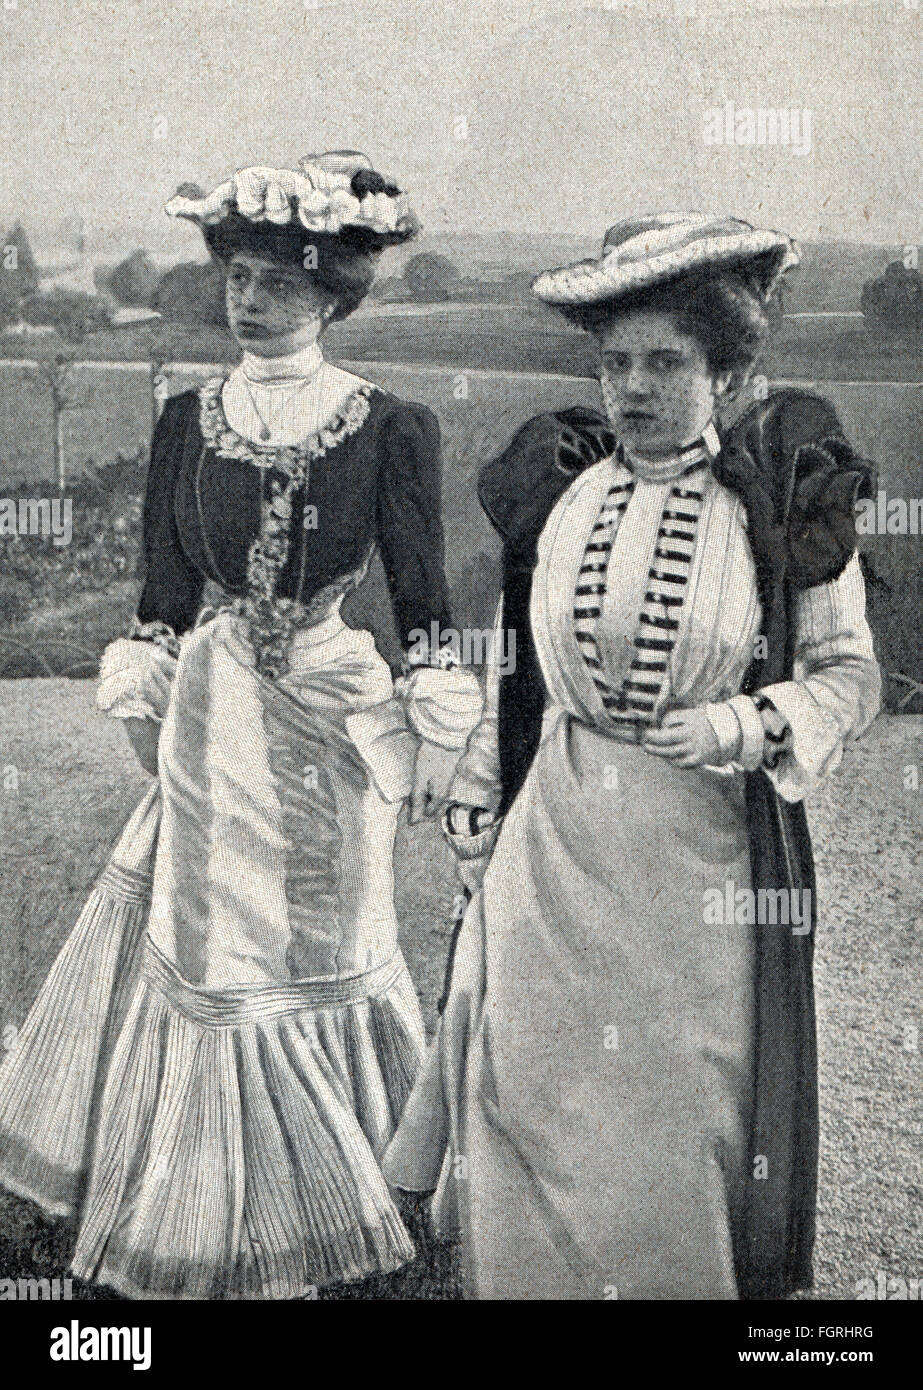 fashion, early 20th century / turn of the century, ladies in dresses for the race course, Paris, out of: 'Die Woche', number 25, Berlin, June 1901, Additional-Rights-Clearences-Not Available Stock Photo